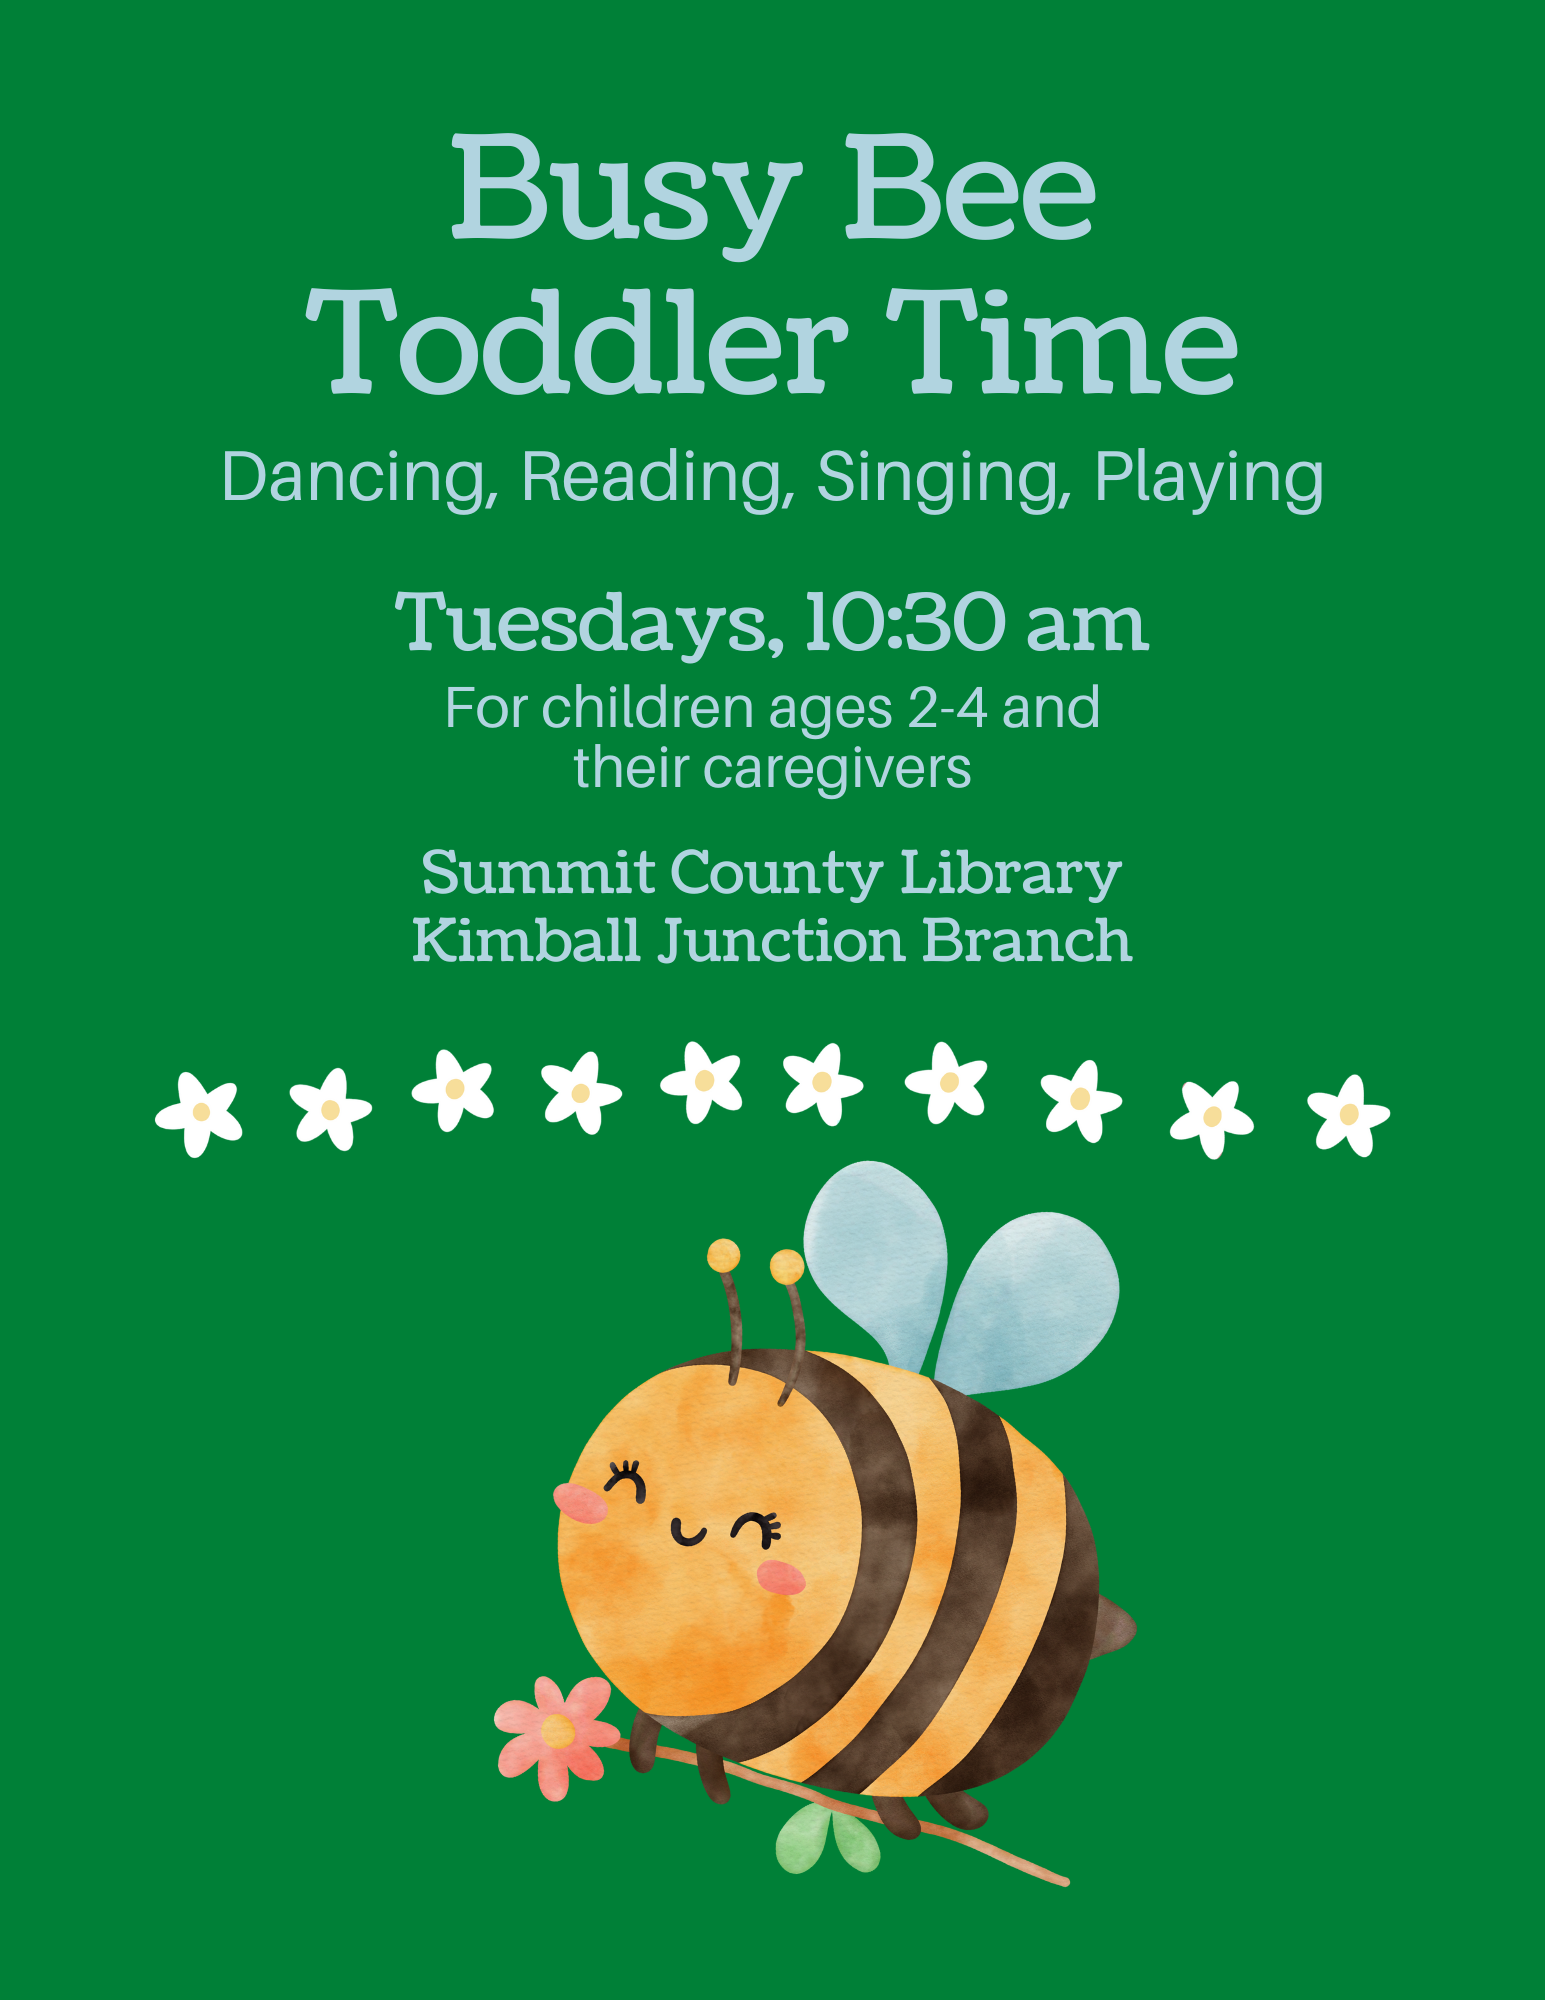 Busy Bee Toddler Time